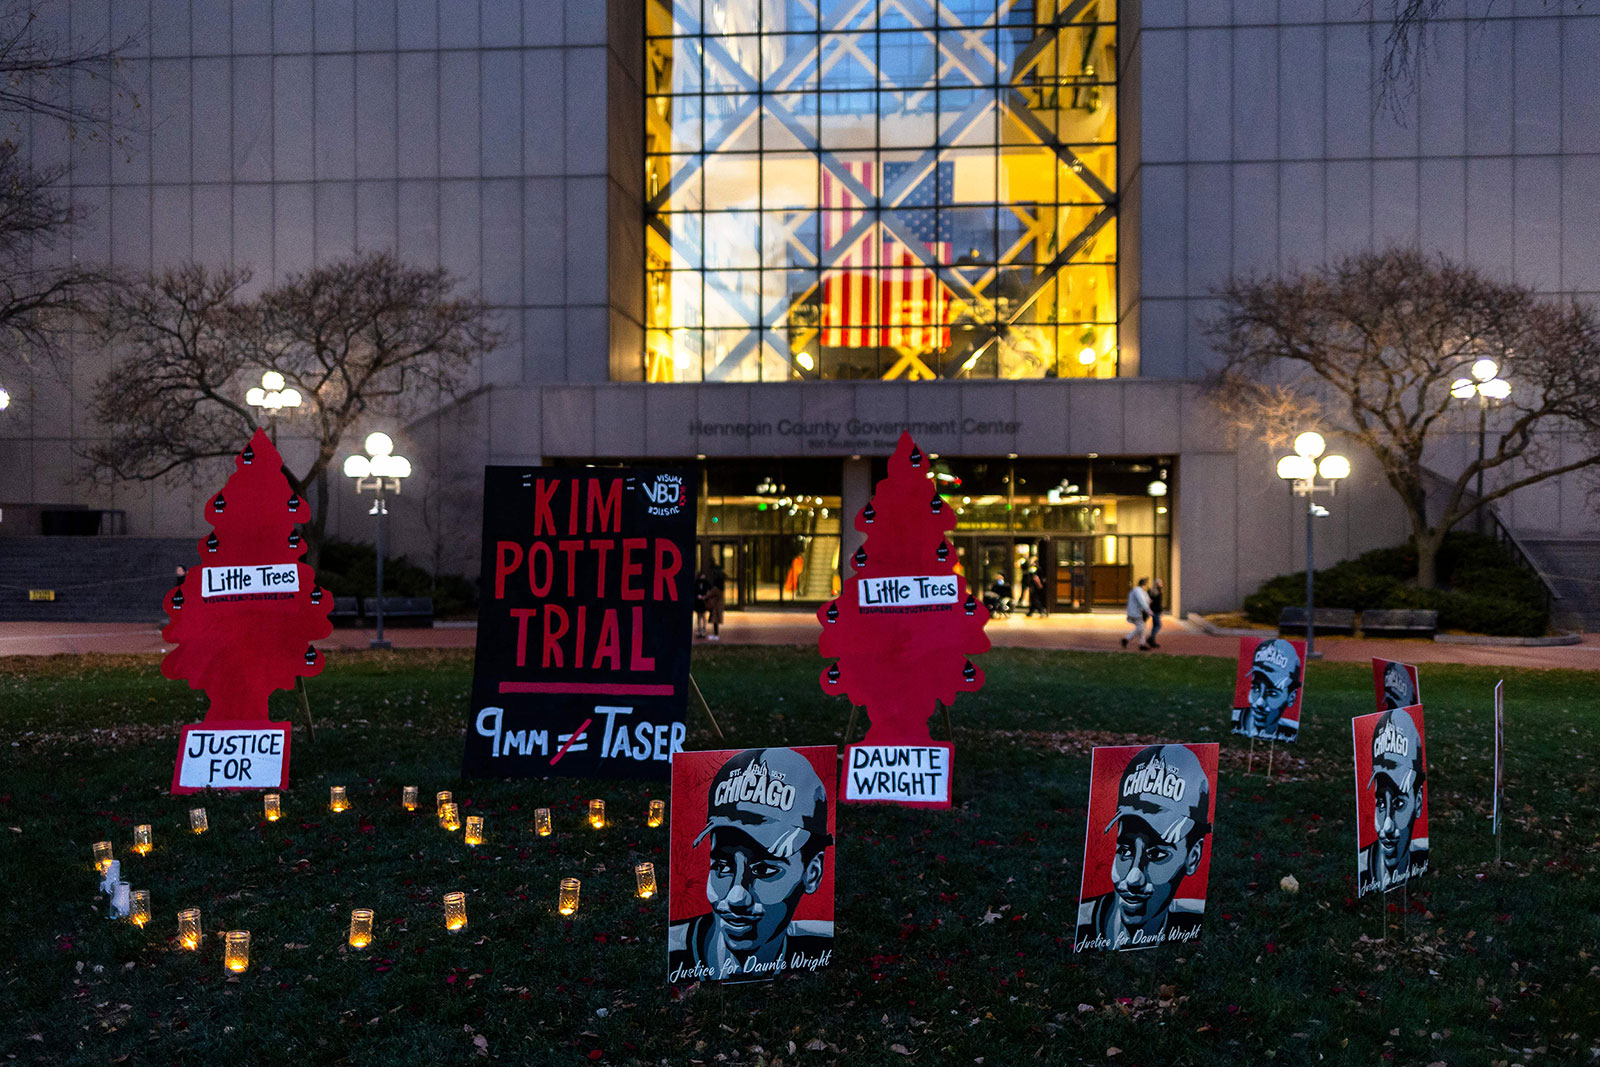 Signs and candles are placed in front of the Hennepin County Government Center in Minneapolis on November 30.